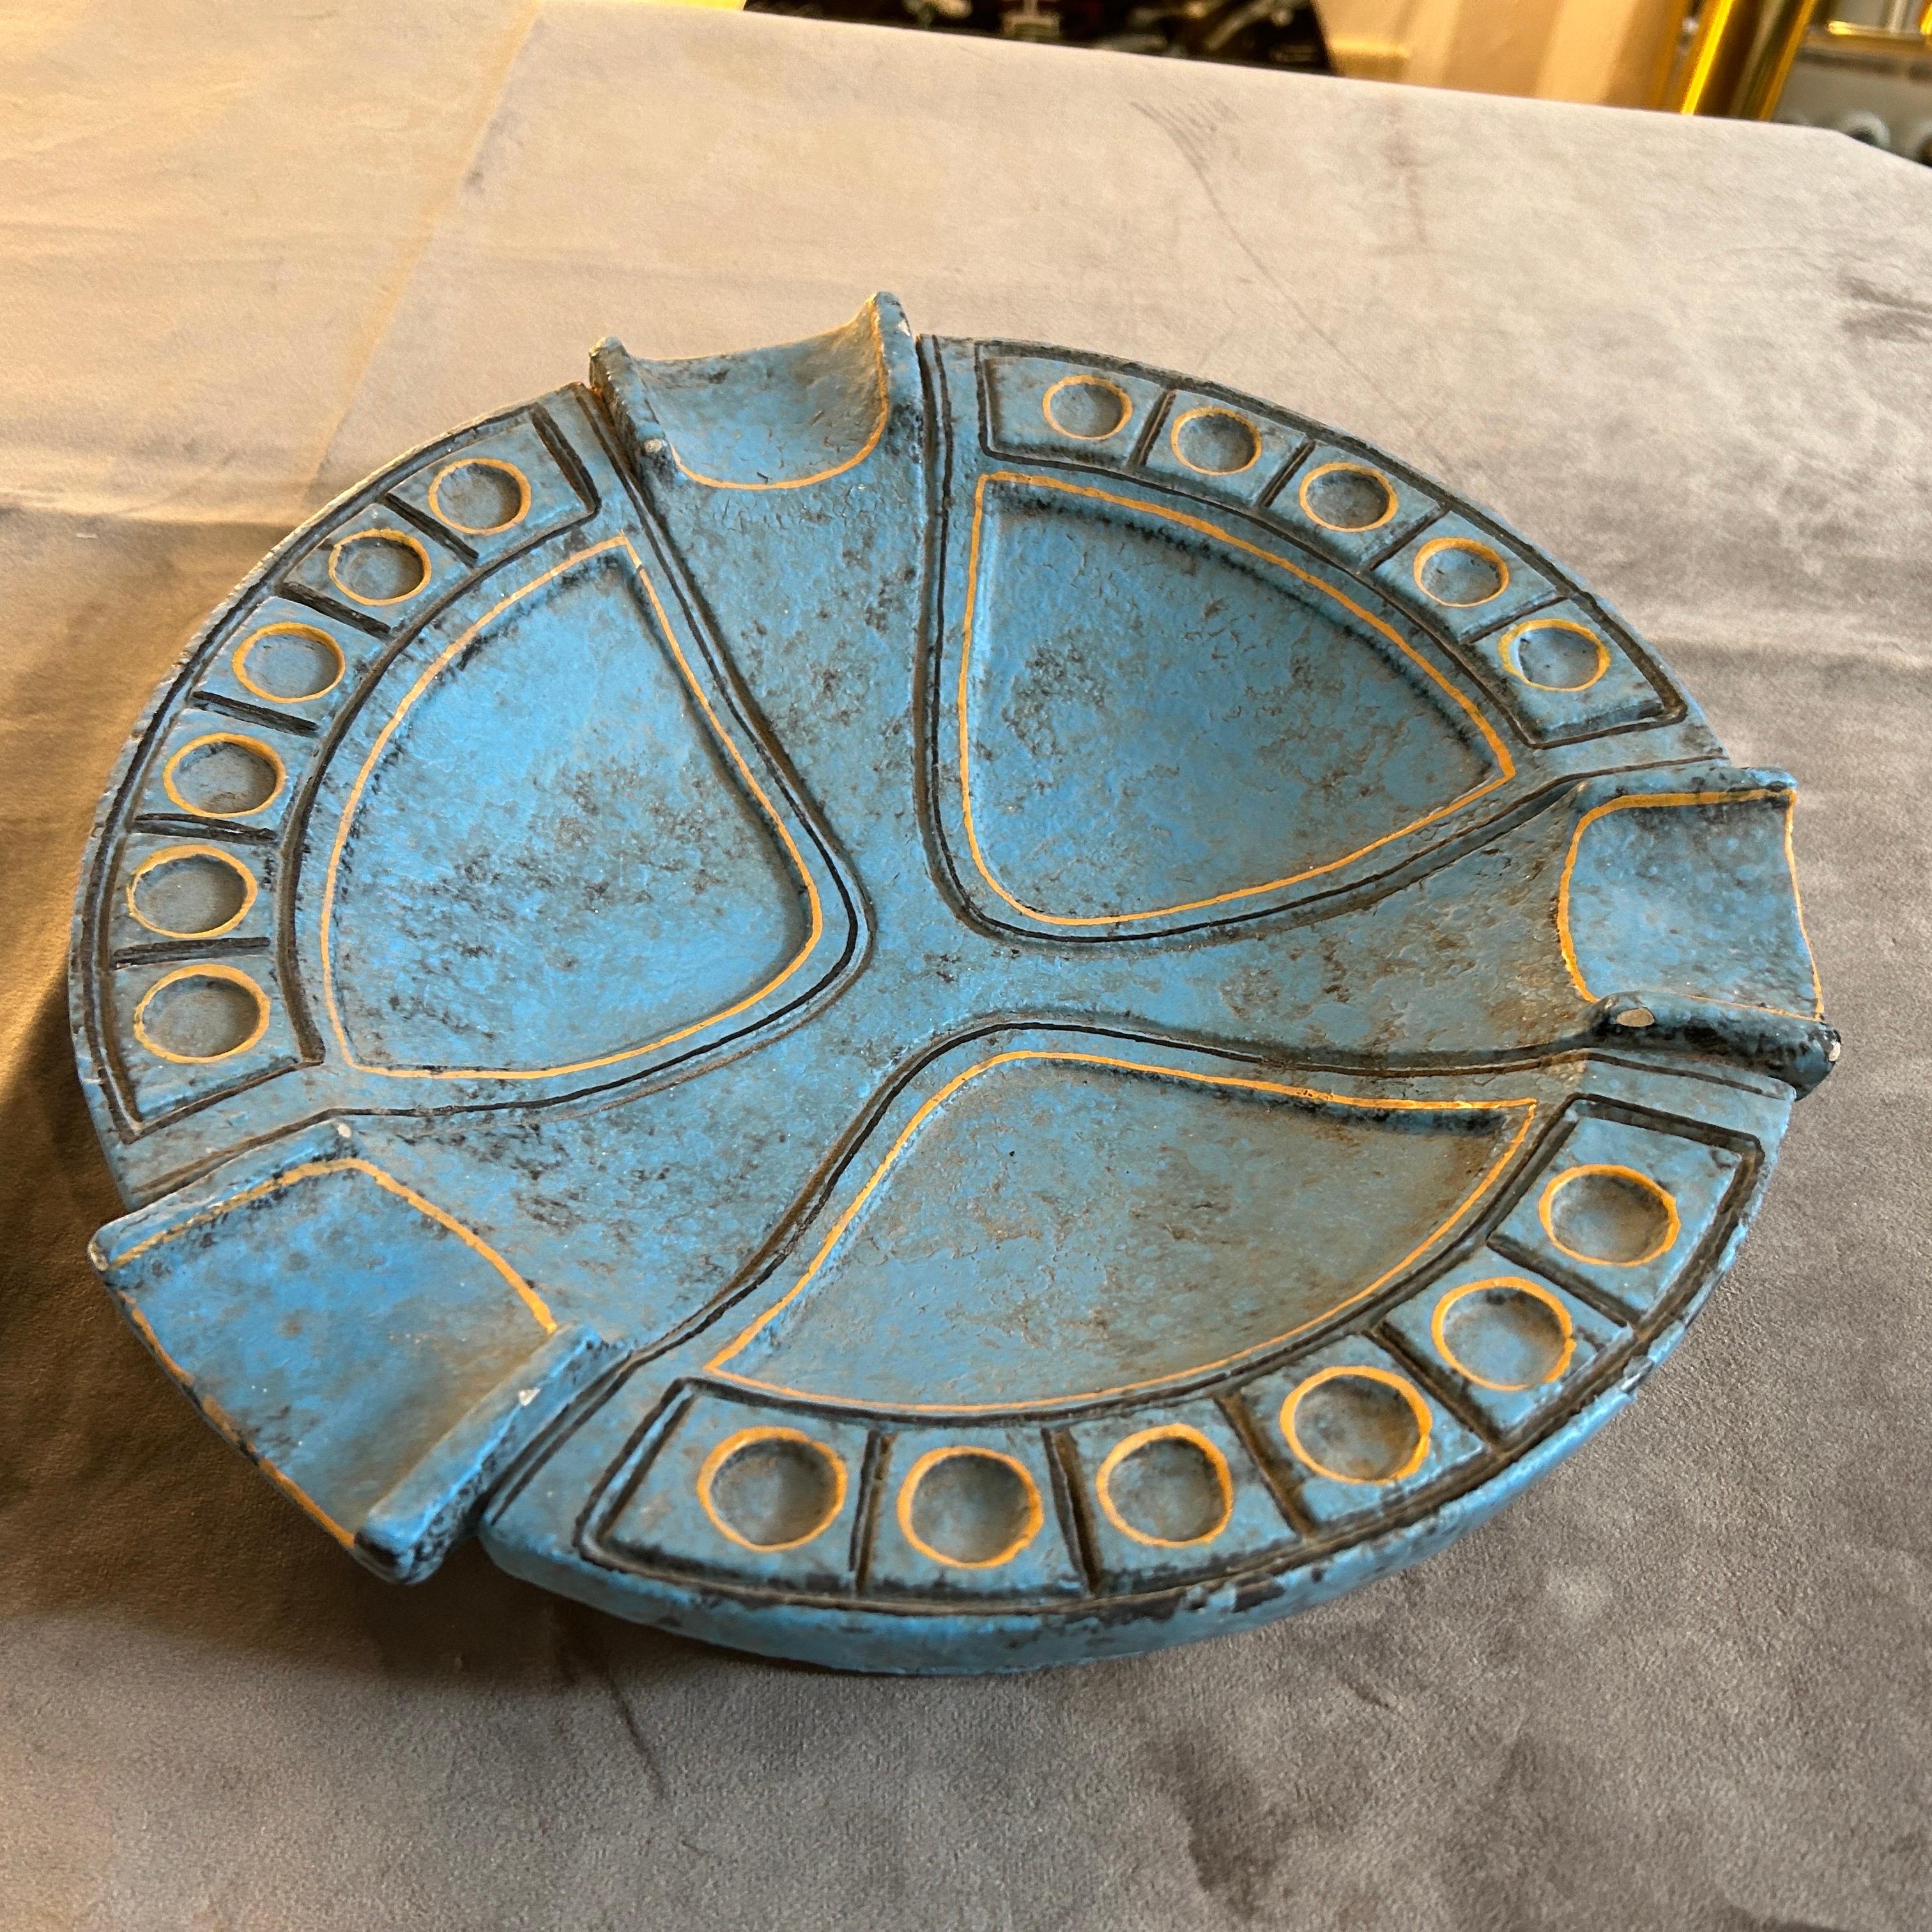 1969 Etruscan Inspired Blue and Yellow Ceramic Italian Ashtray by Casucci In Good Condition For Sale In Aci Castello, IT